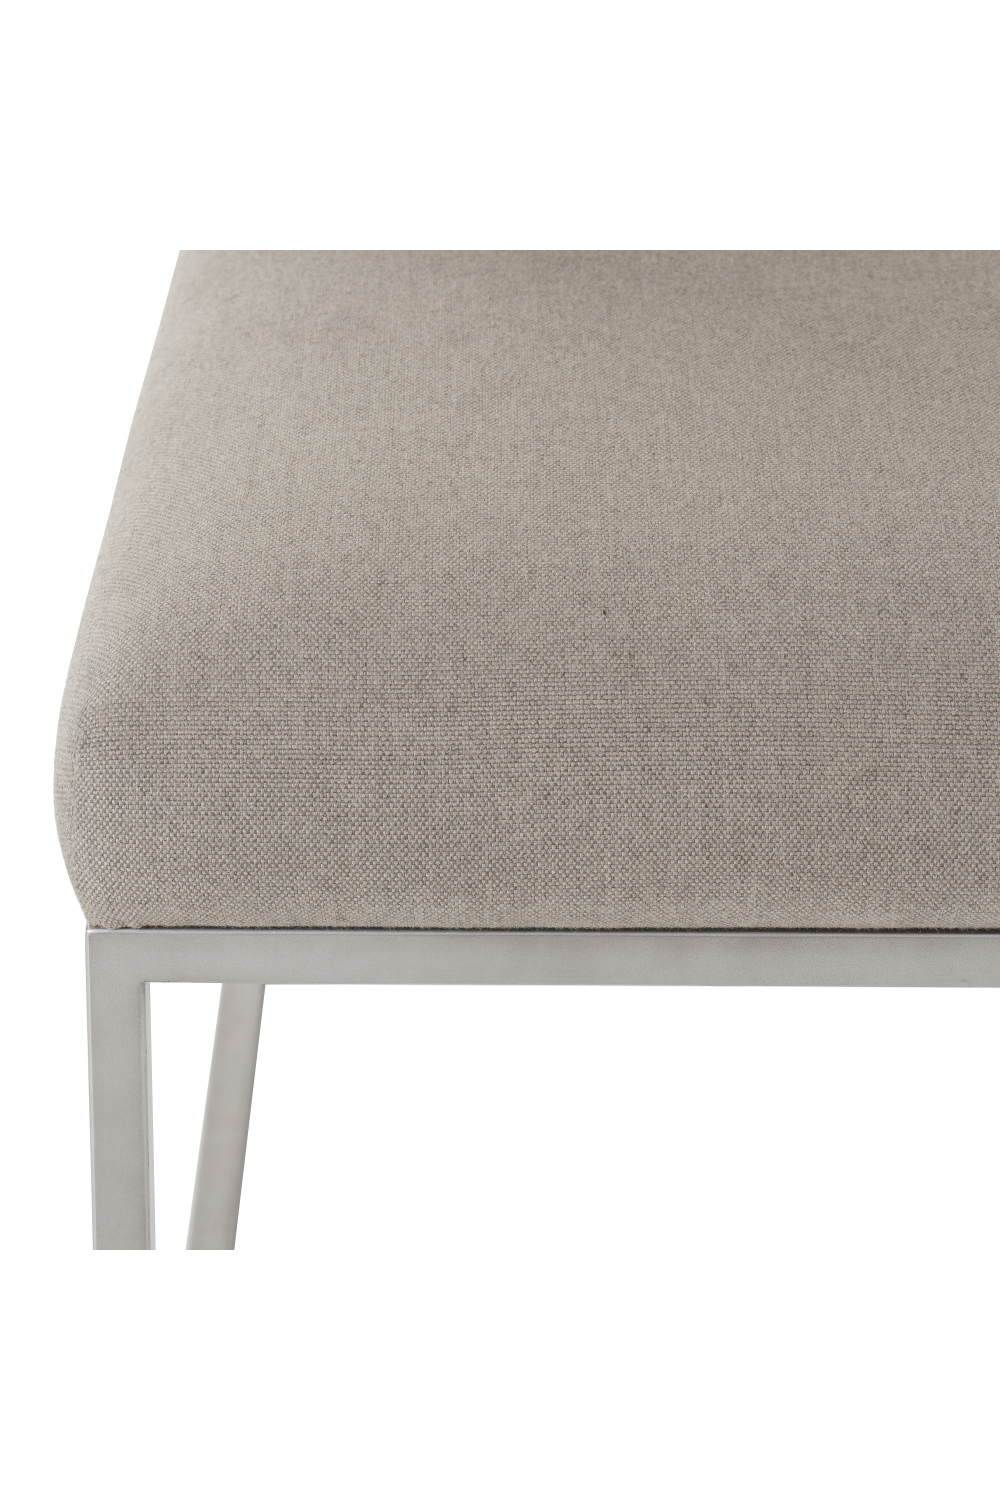 Gray Upholstery Dining Side Chair | Andrew Martin Paxton | OROA